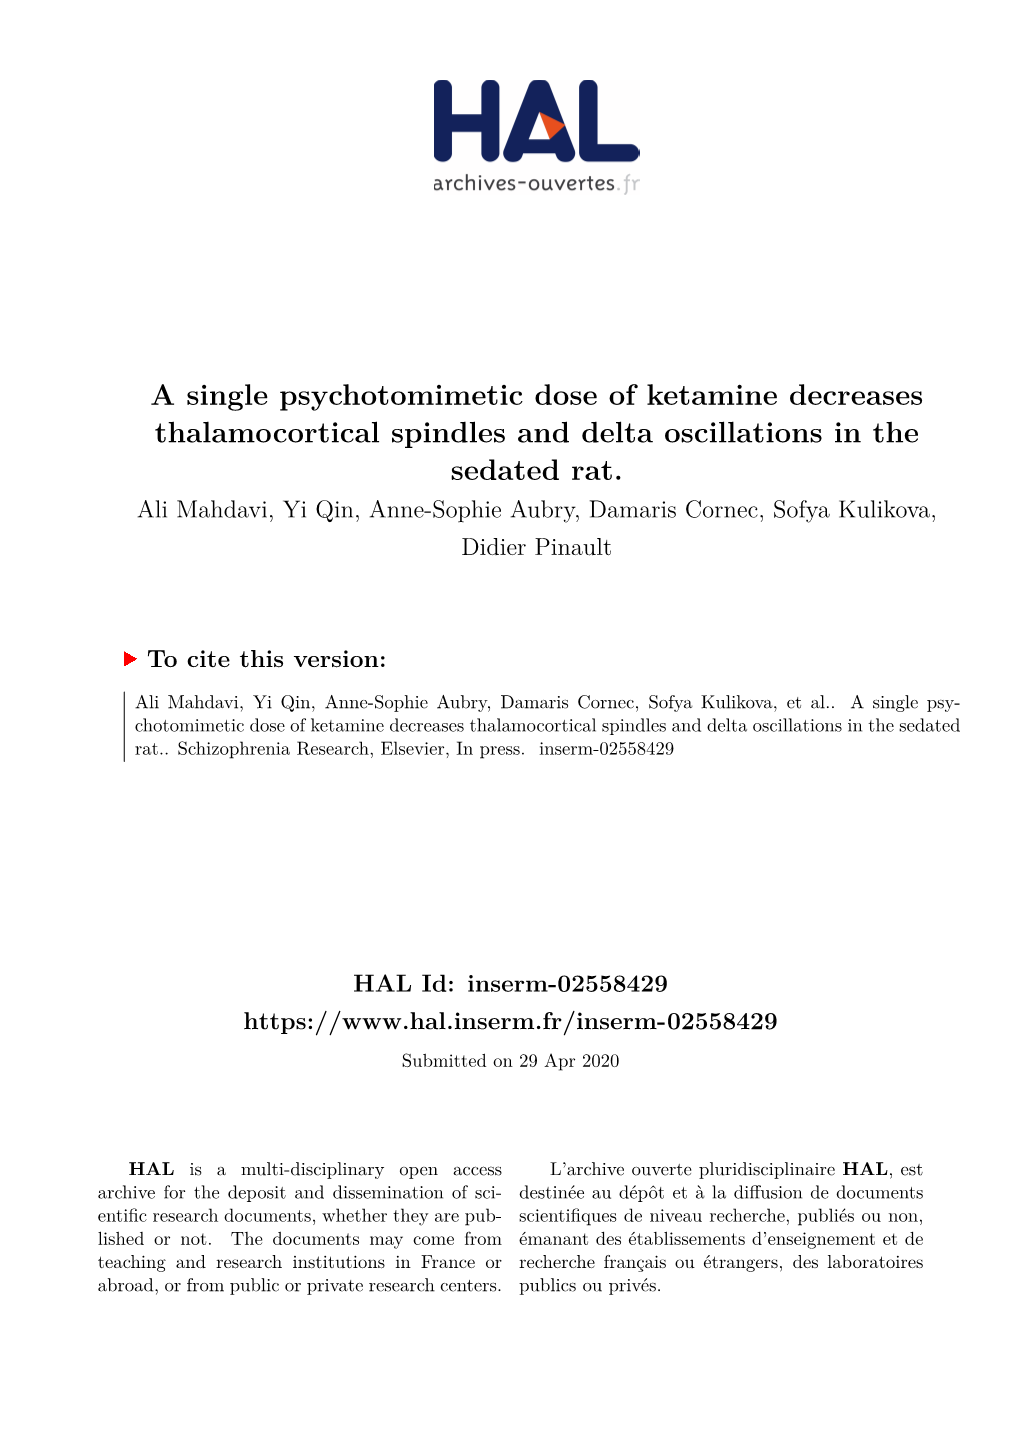 A Single Psychotomimetic Dose of Ketamine Decreases Thalamocortical Spindles and Delta Oscillations in the Sedated Rat